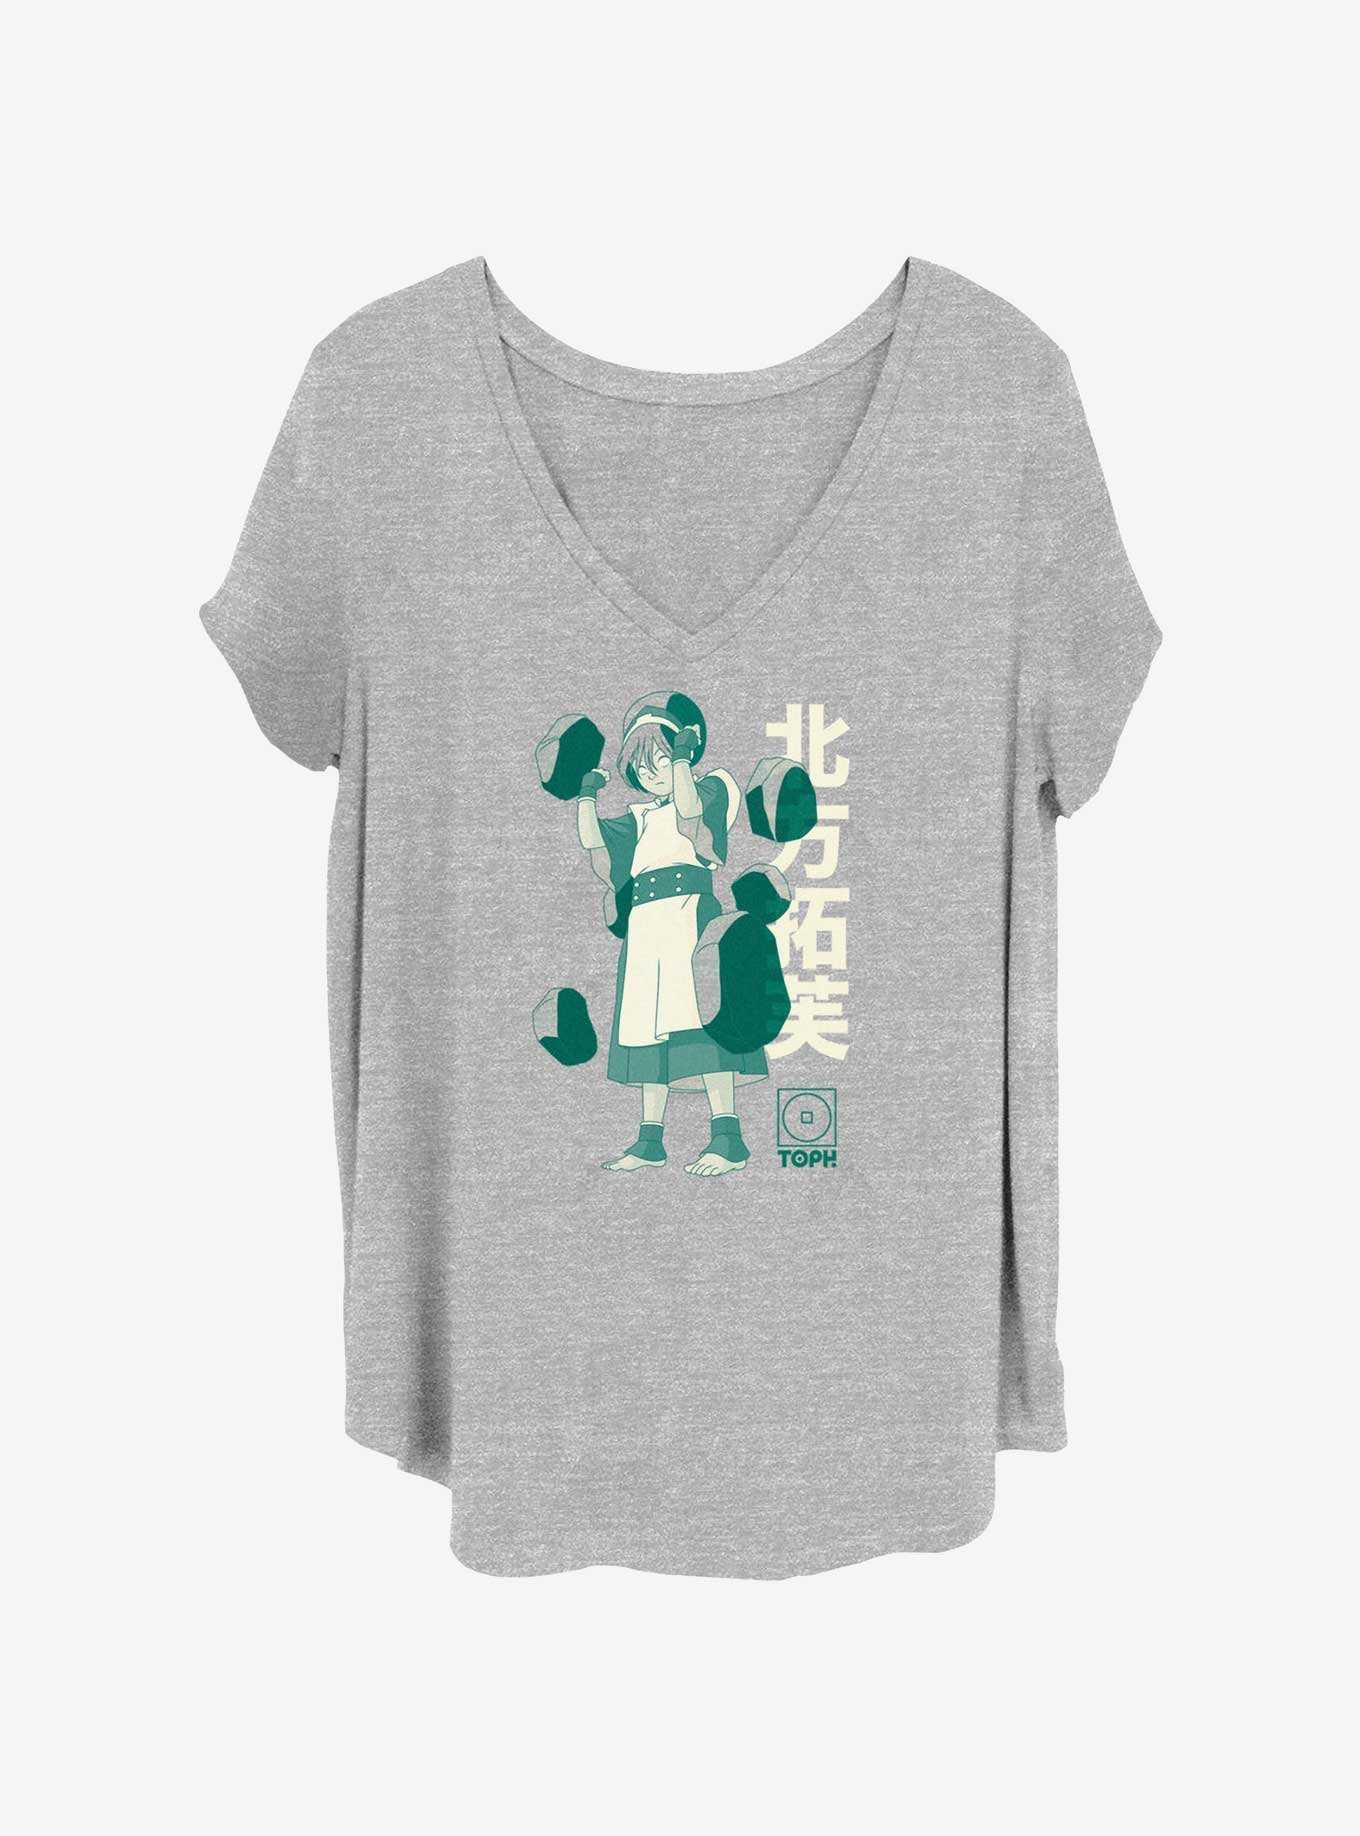 Avatar: The Last Airbender The Greatest Earth Bender Toph Womens T-Shirt Plus Size, , hi-res